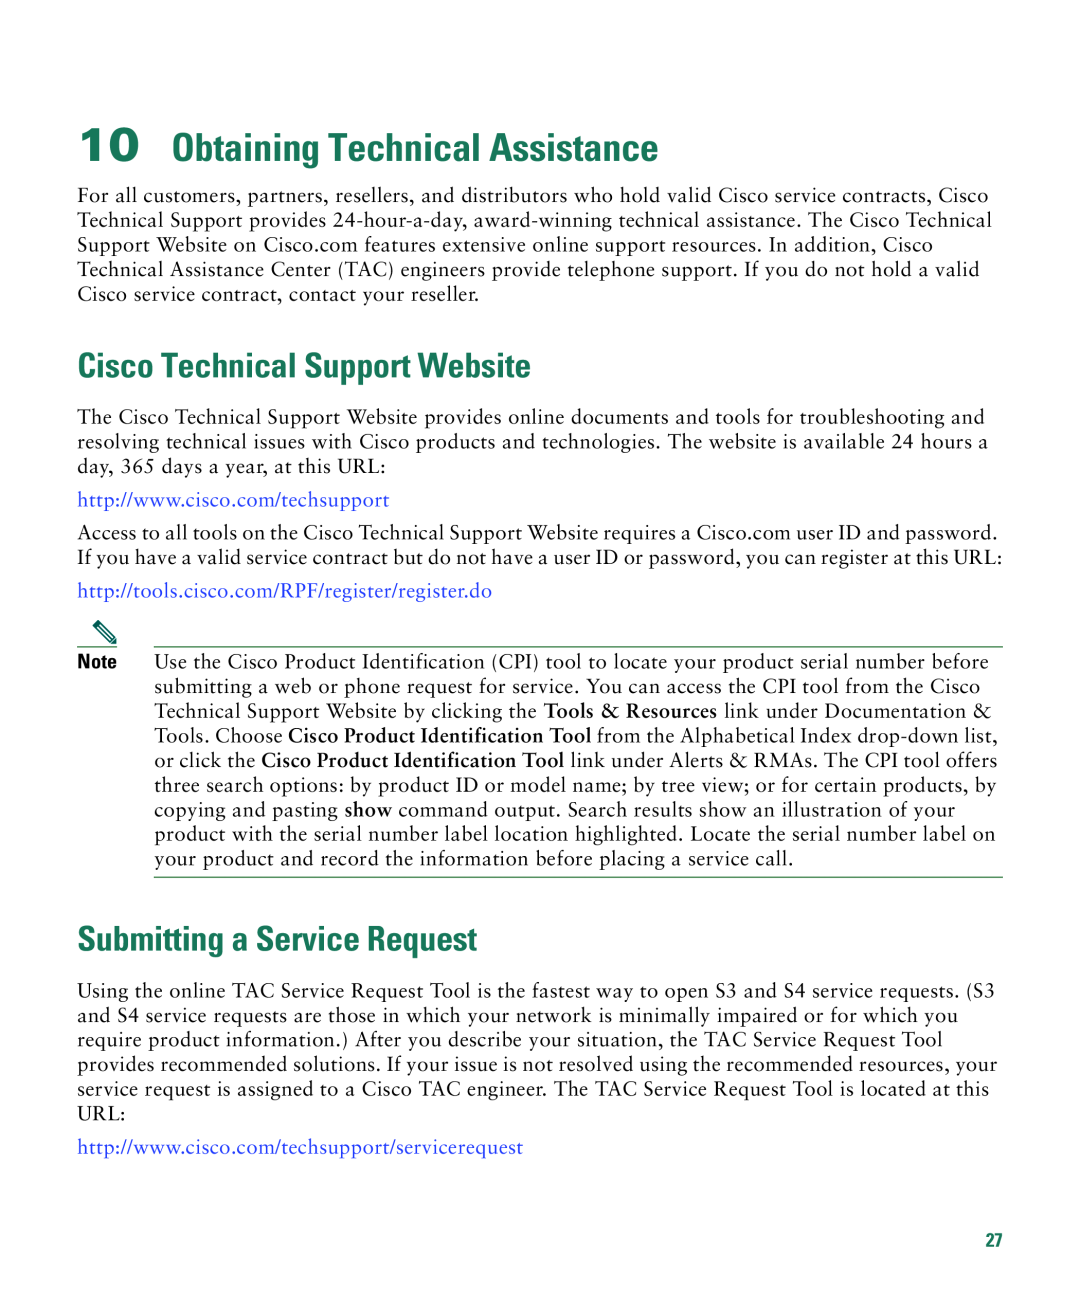 Cisco Systems 3750E-48PD-F Obtaining Technical Assistance, Cisco Technical Support Website, Submitting a Service Request 